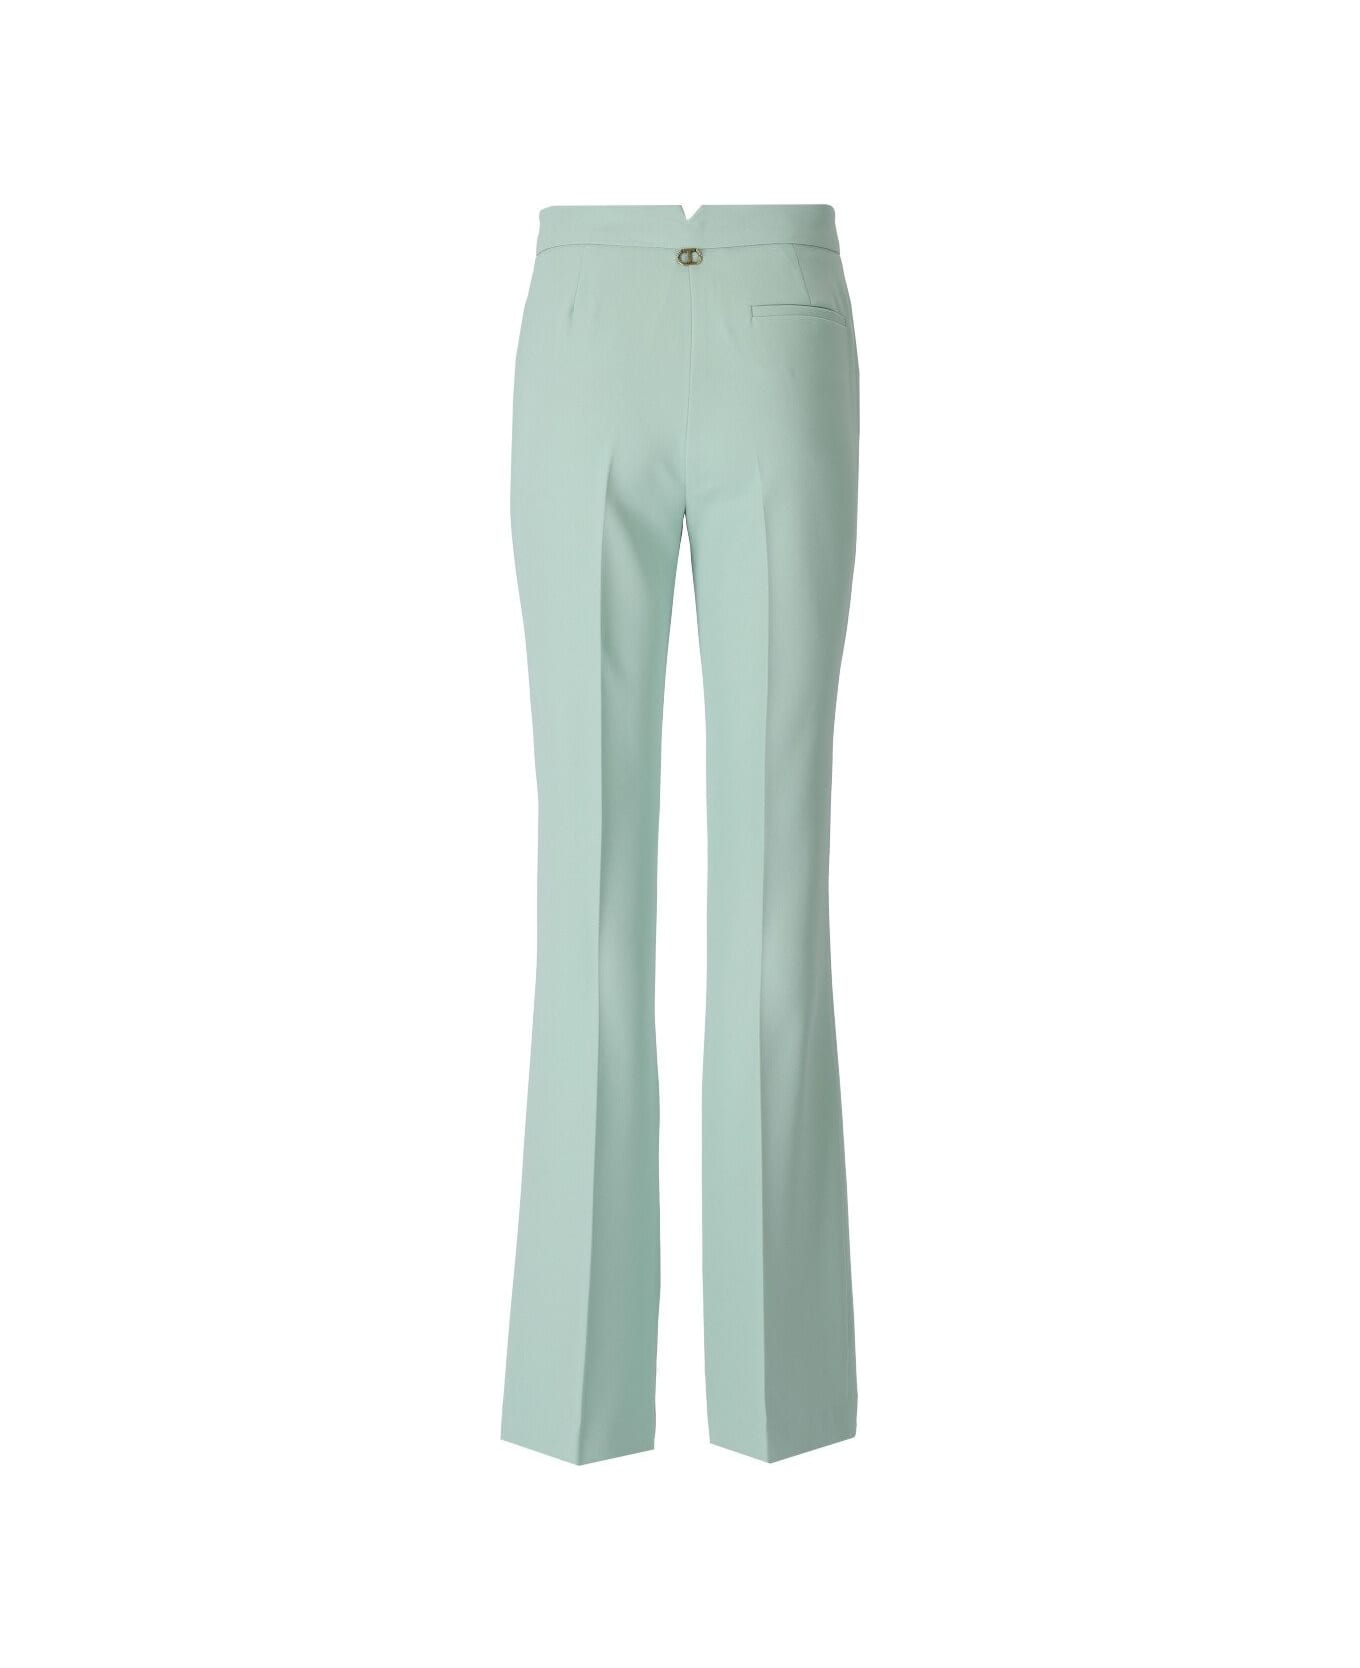 TwinSet Green Flare Trousers - Mint